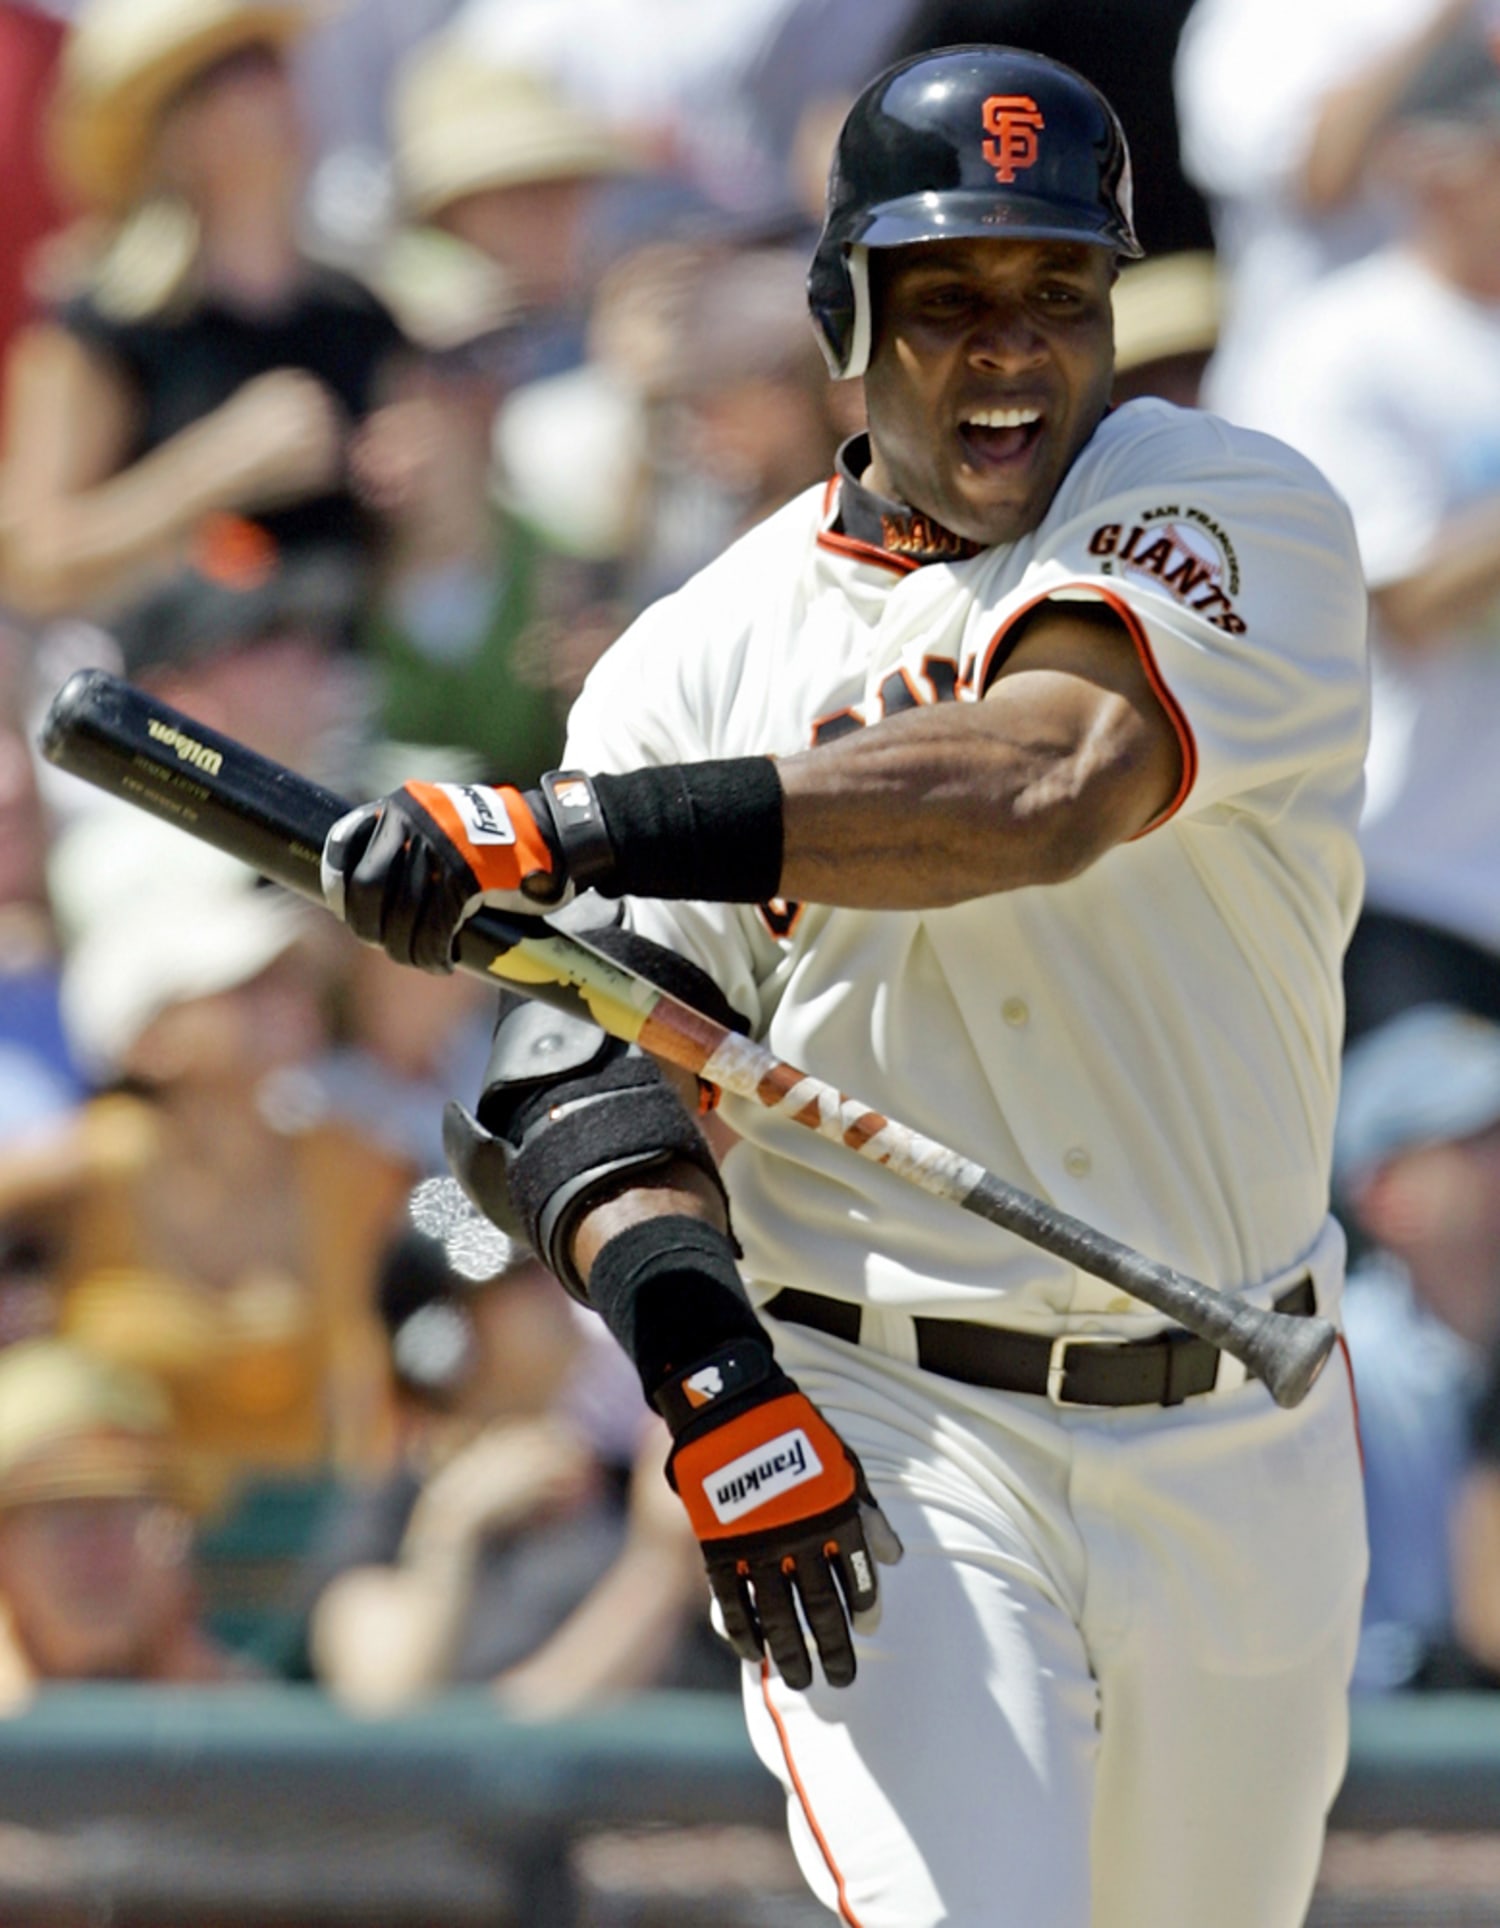 Should Barry Bonds be in the HOF for his career before steroids? - Quora